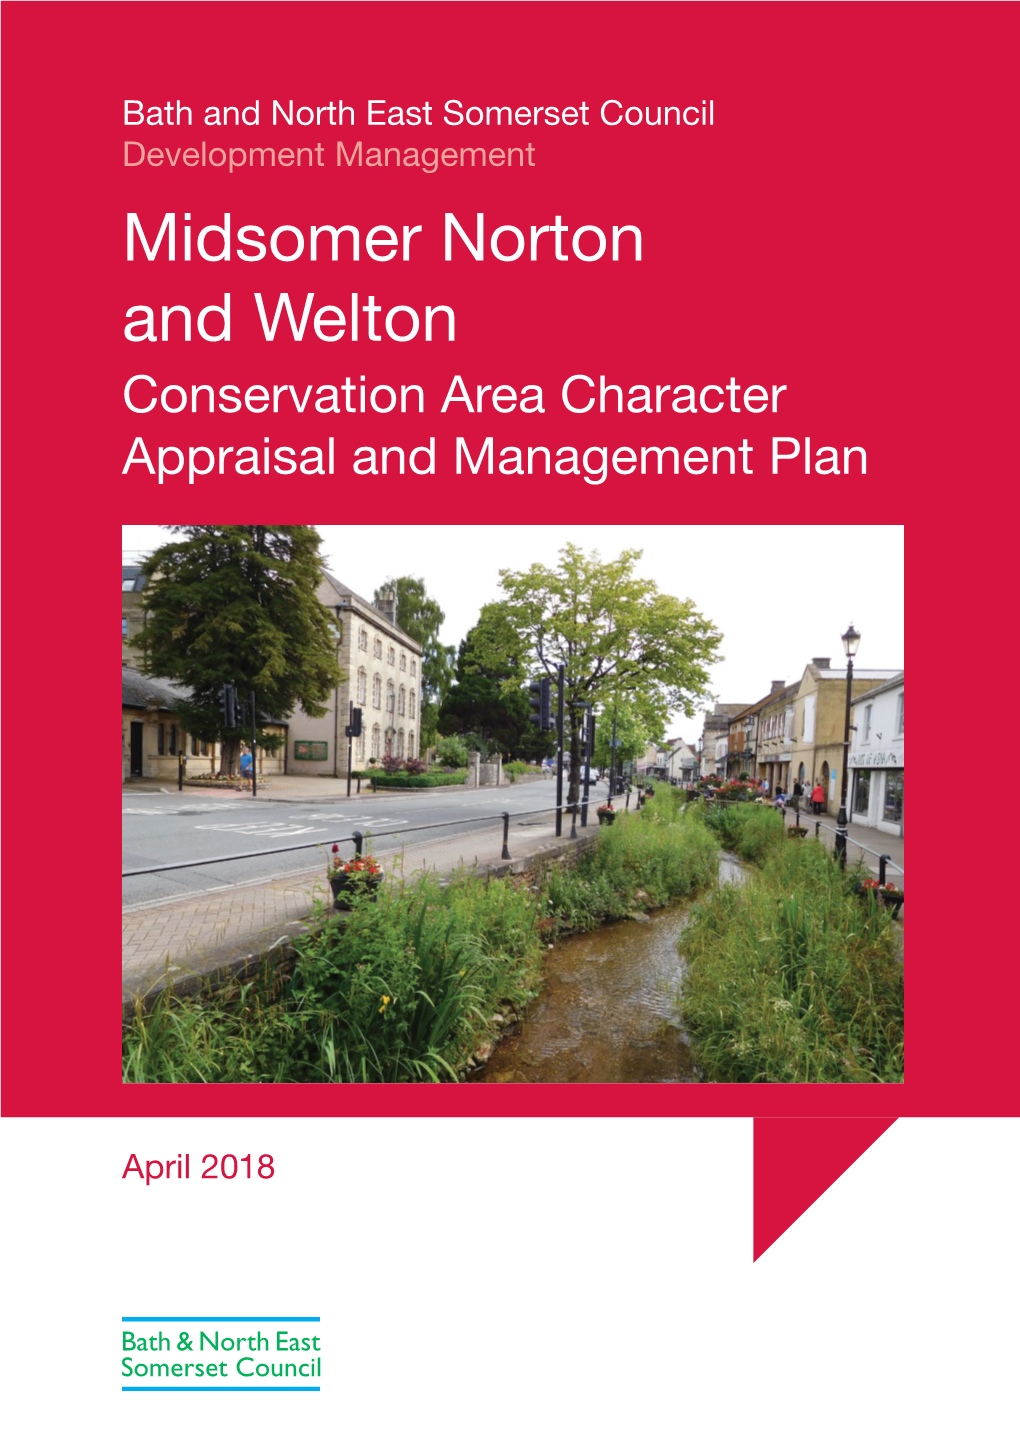 Midsomer Norton and Welton Conservation Area Character Appraisal and Management Plan